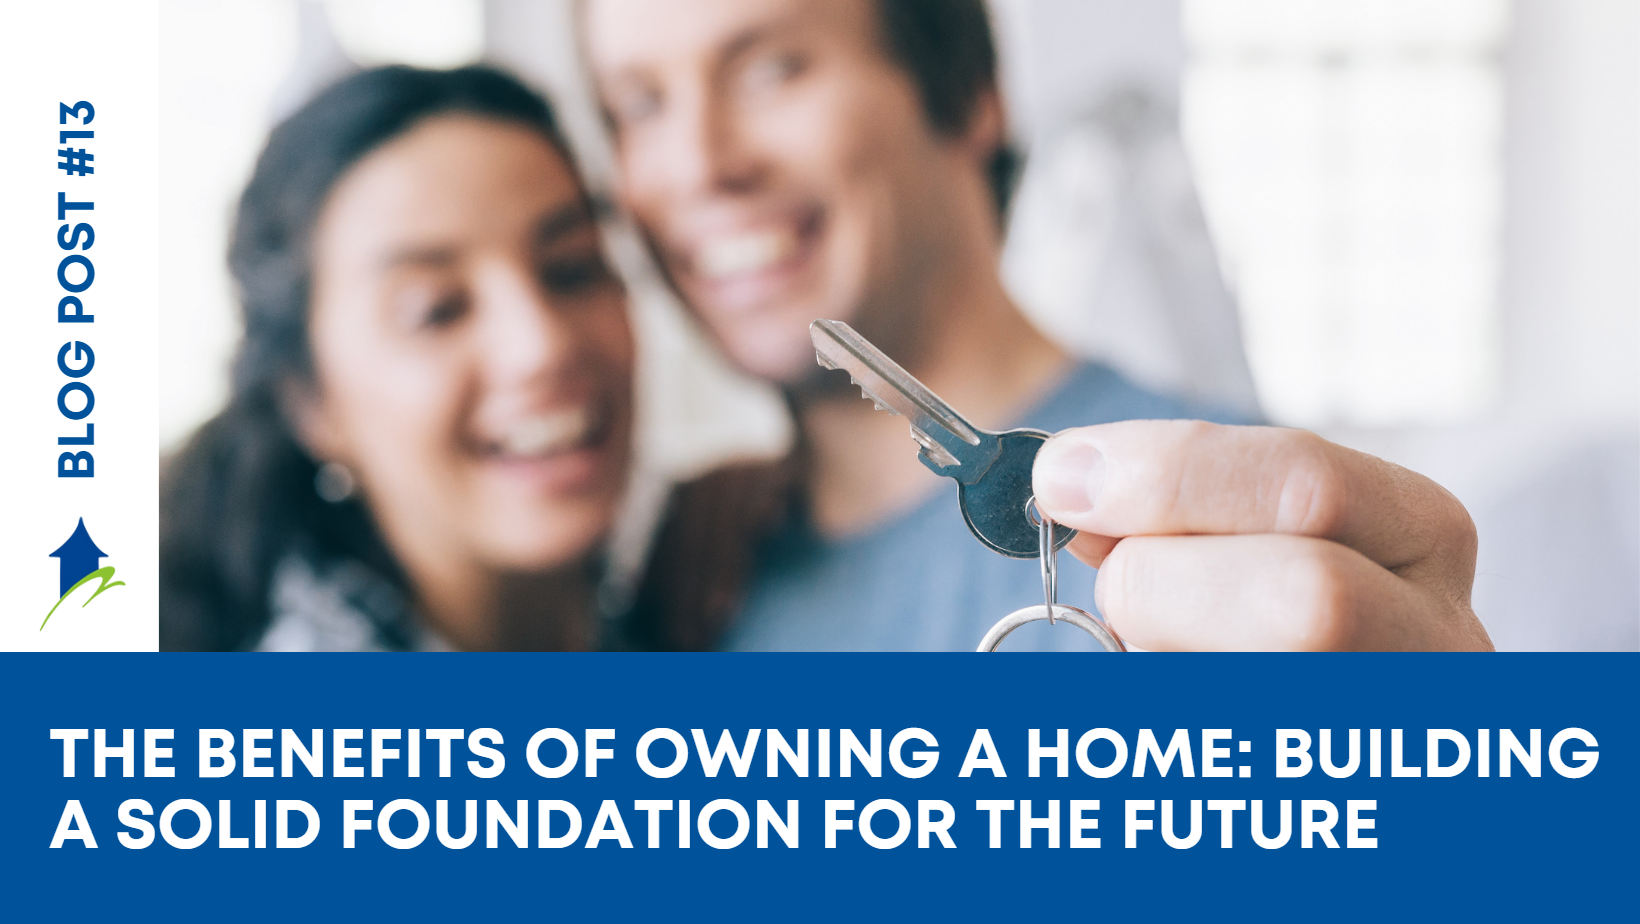 The Benefits of Owning a Home: Building a Solid Foundation for the Future￼